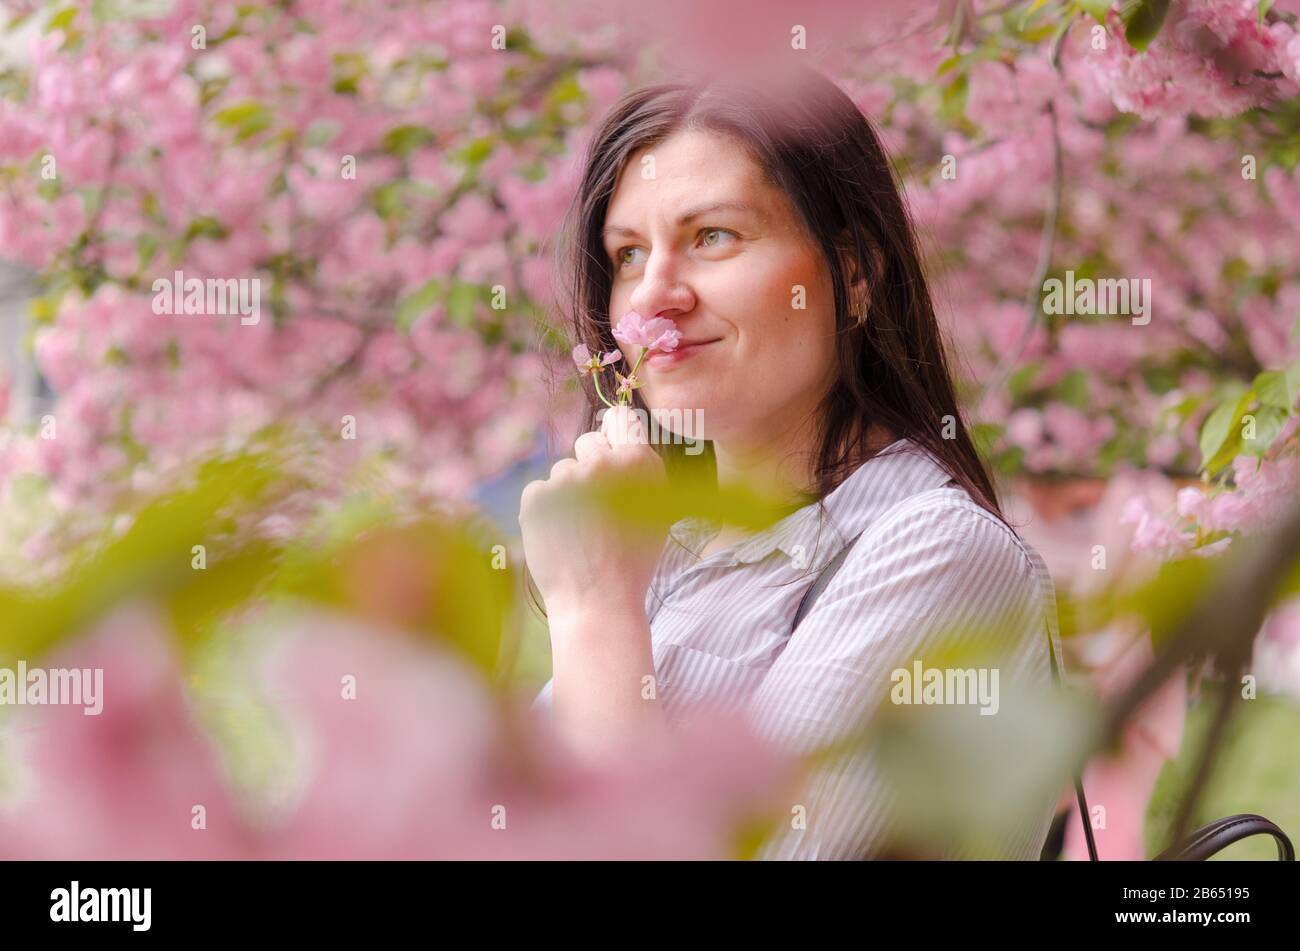 A young Caucasian girl enjoys the aroma and beauty of cherry blossoms. Cherry blossom in the city park of Dnipro Ukraine in Eastern Europe. Stock Photo